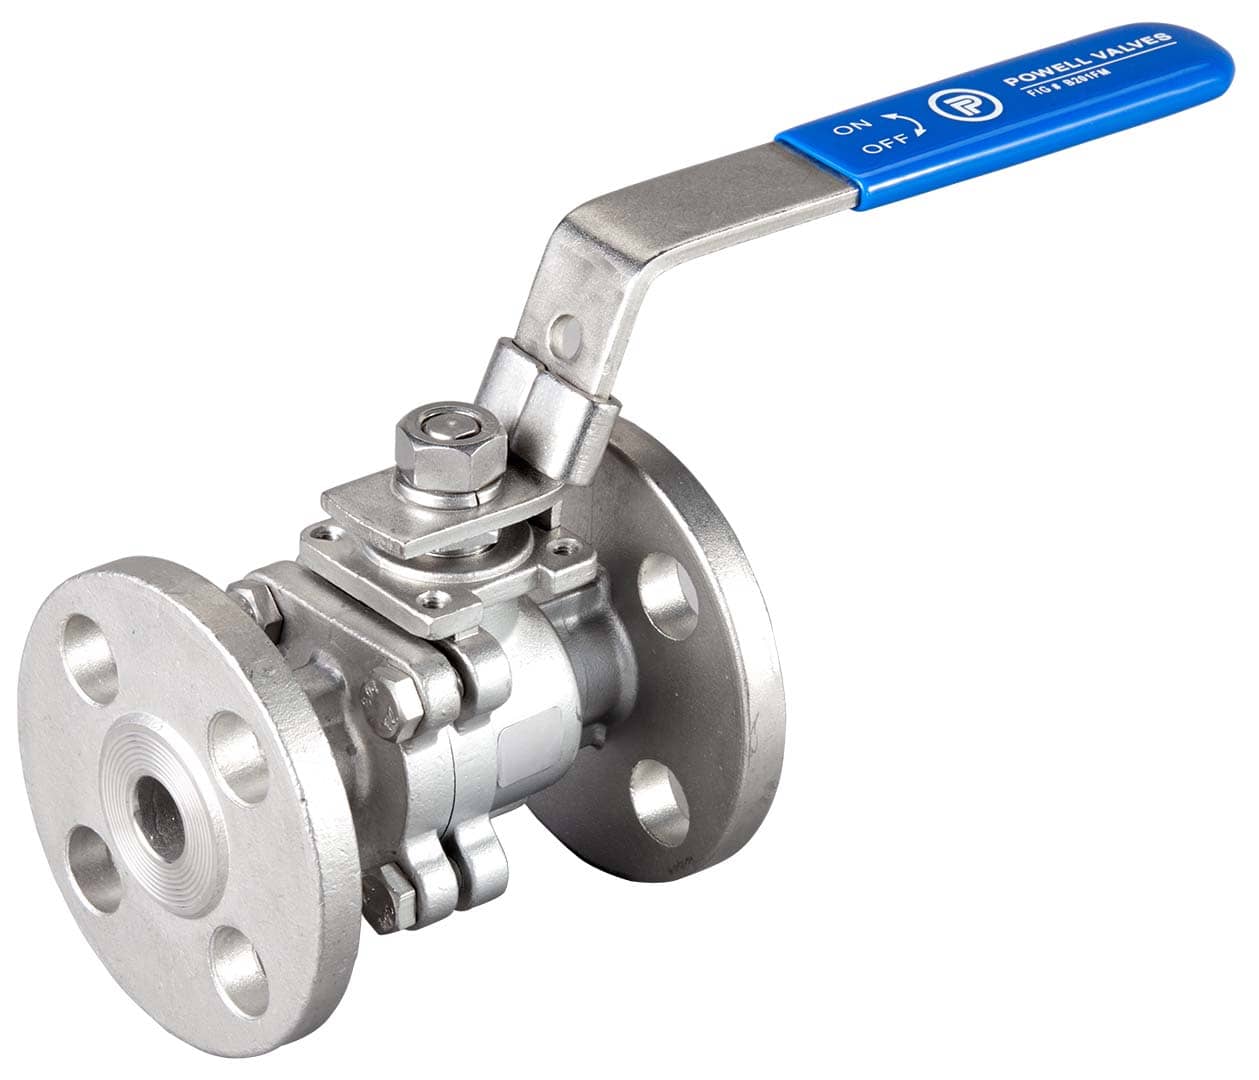 SS FLANGED BALL VALVE MANUFACTURERS IN HARYANA